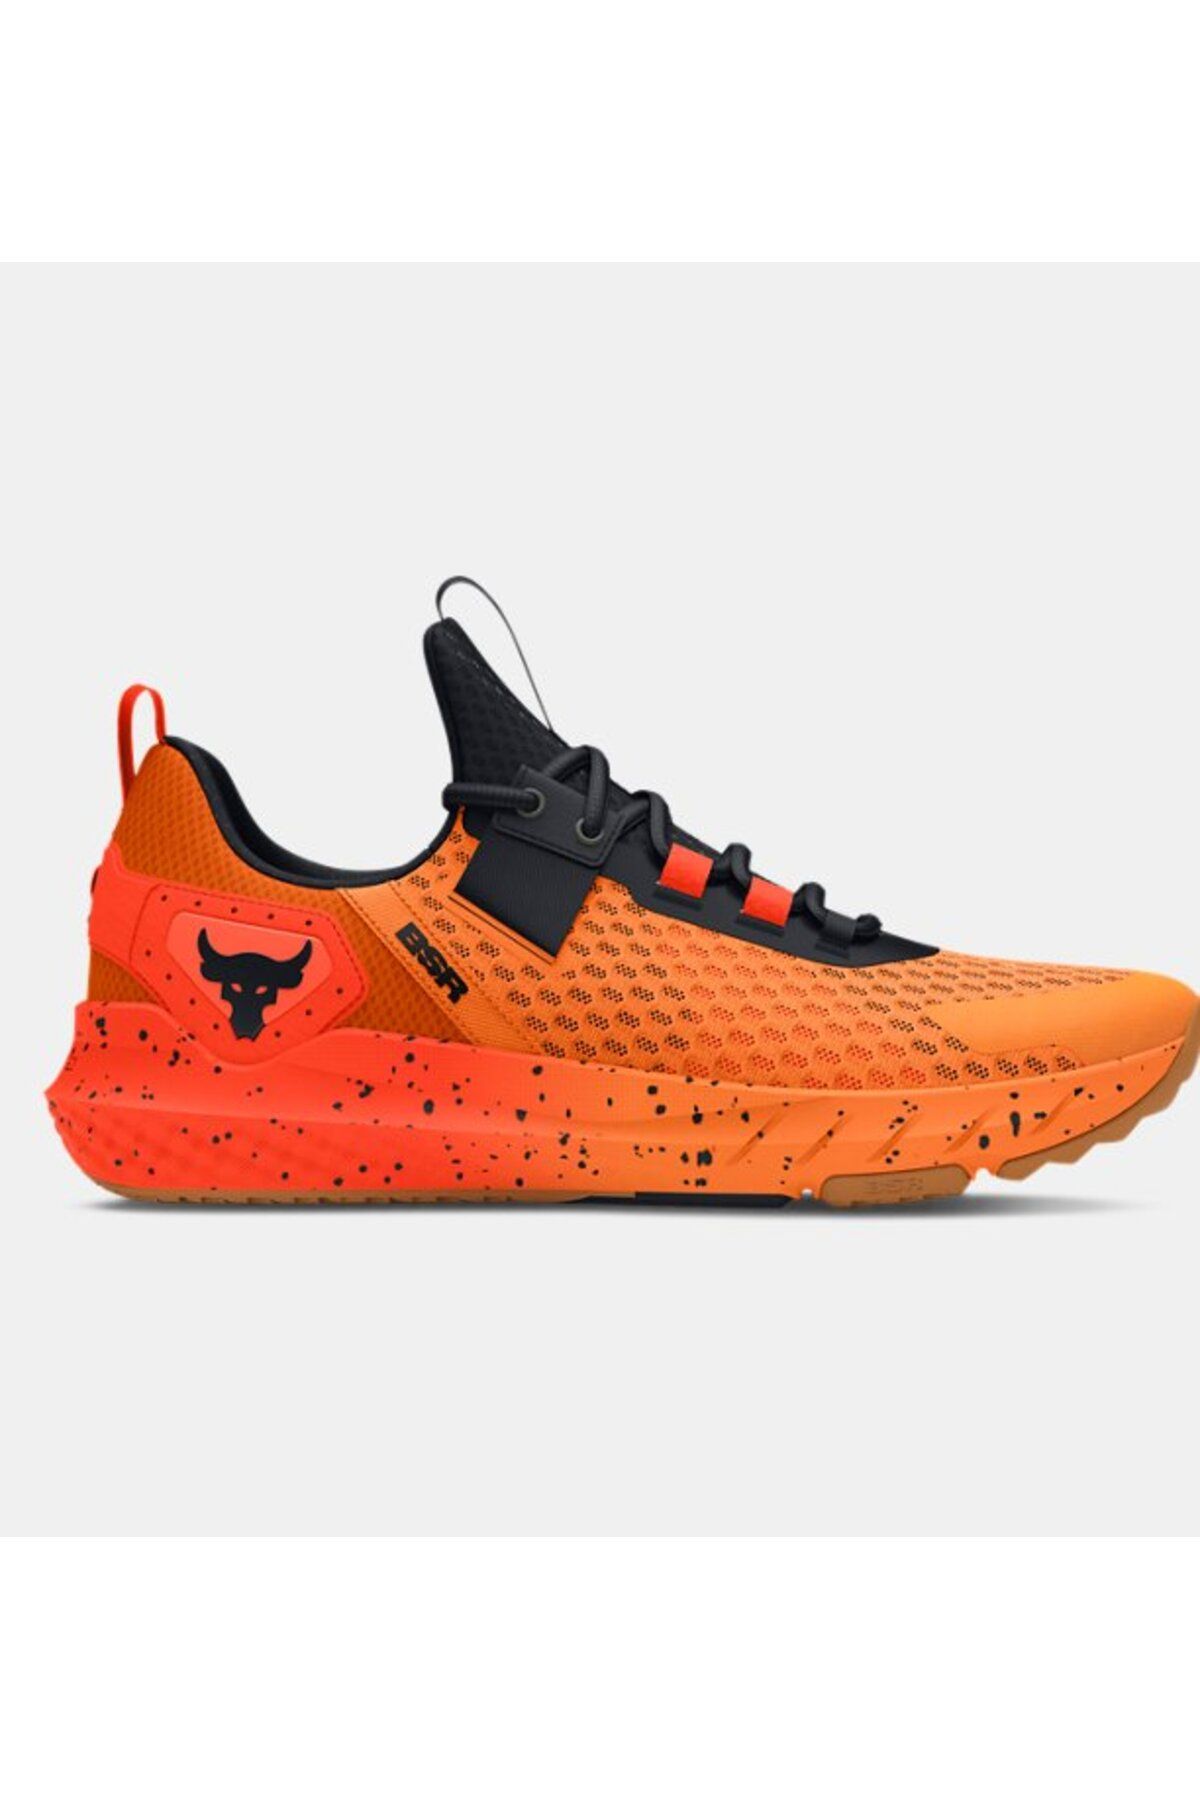 Under Armour UA Project Rock BSR 4 3027344-800